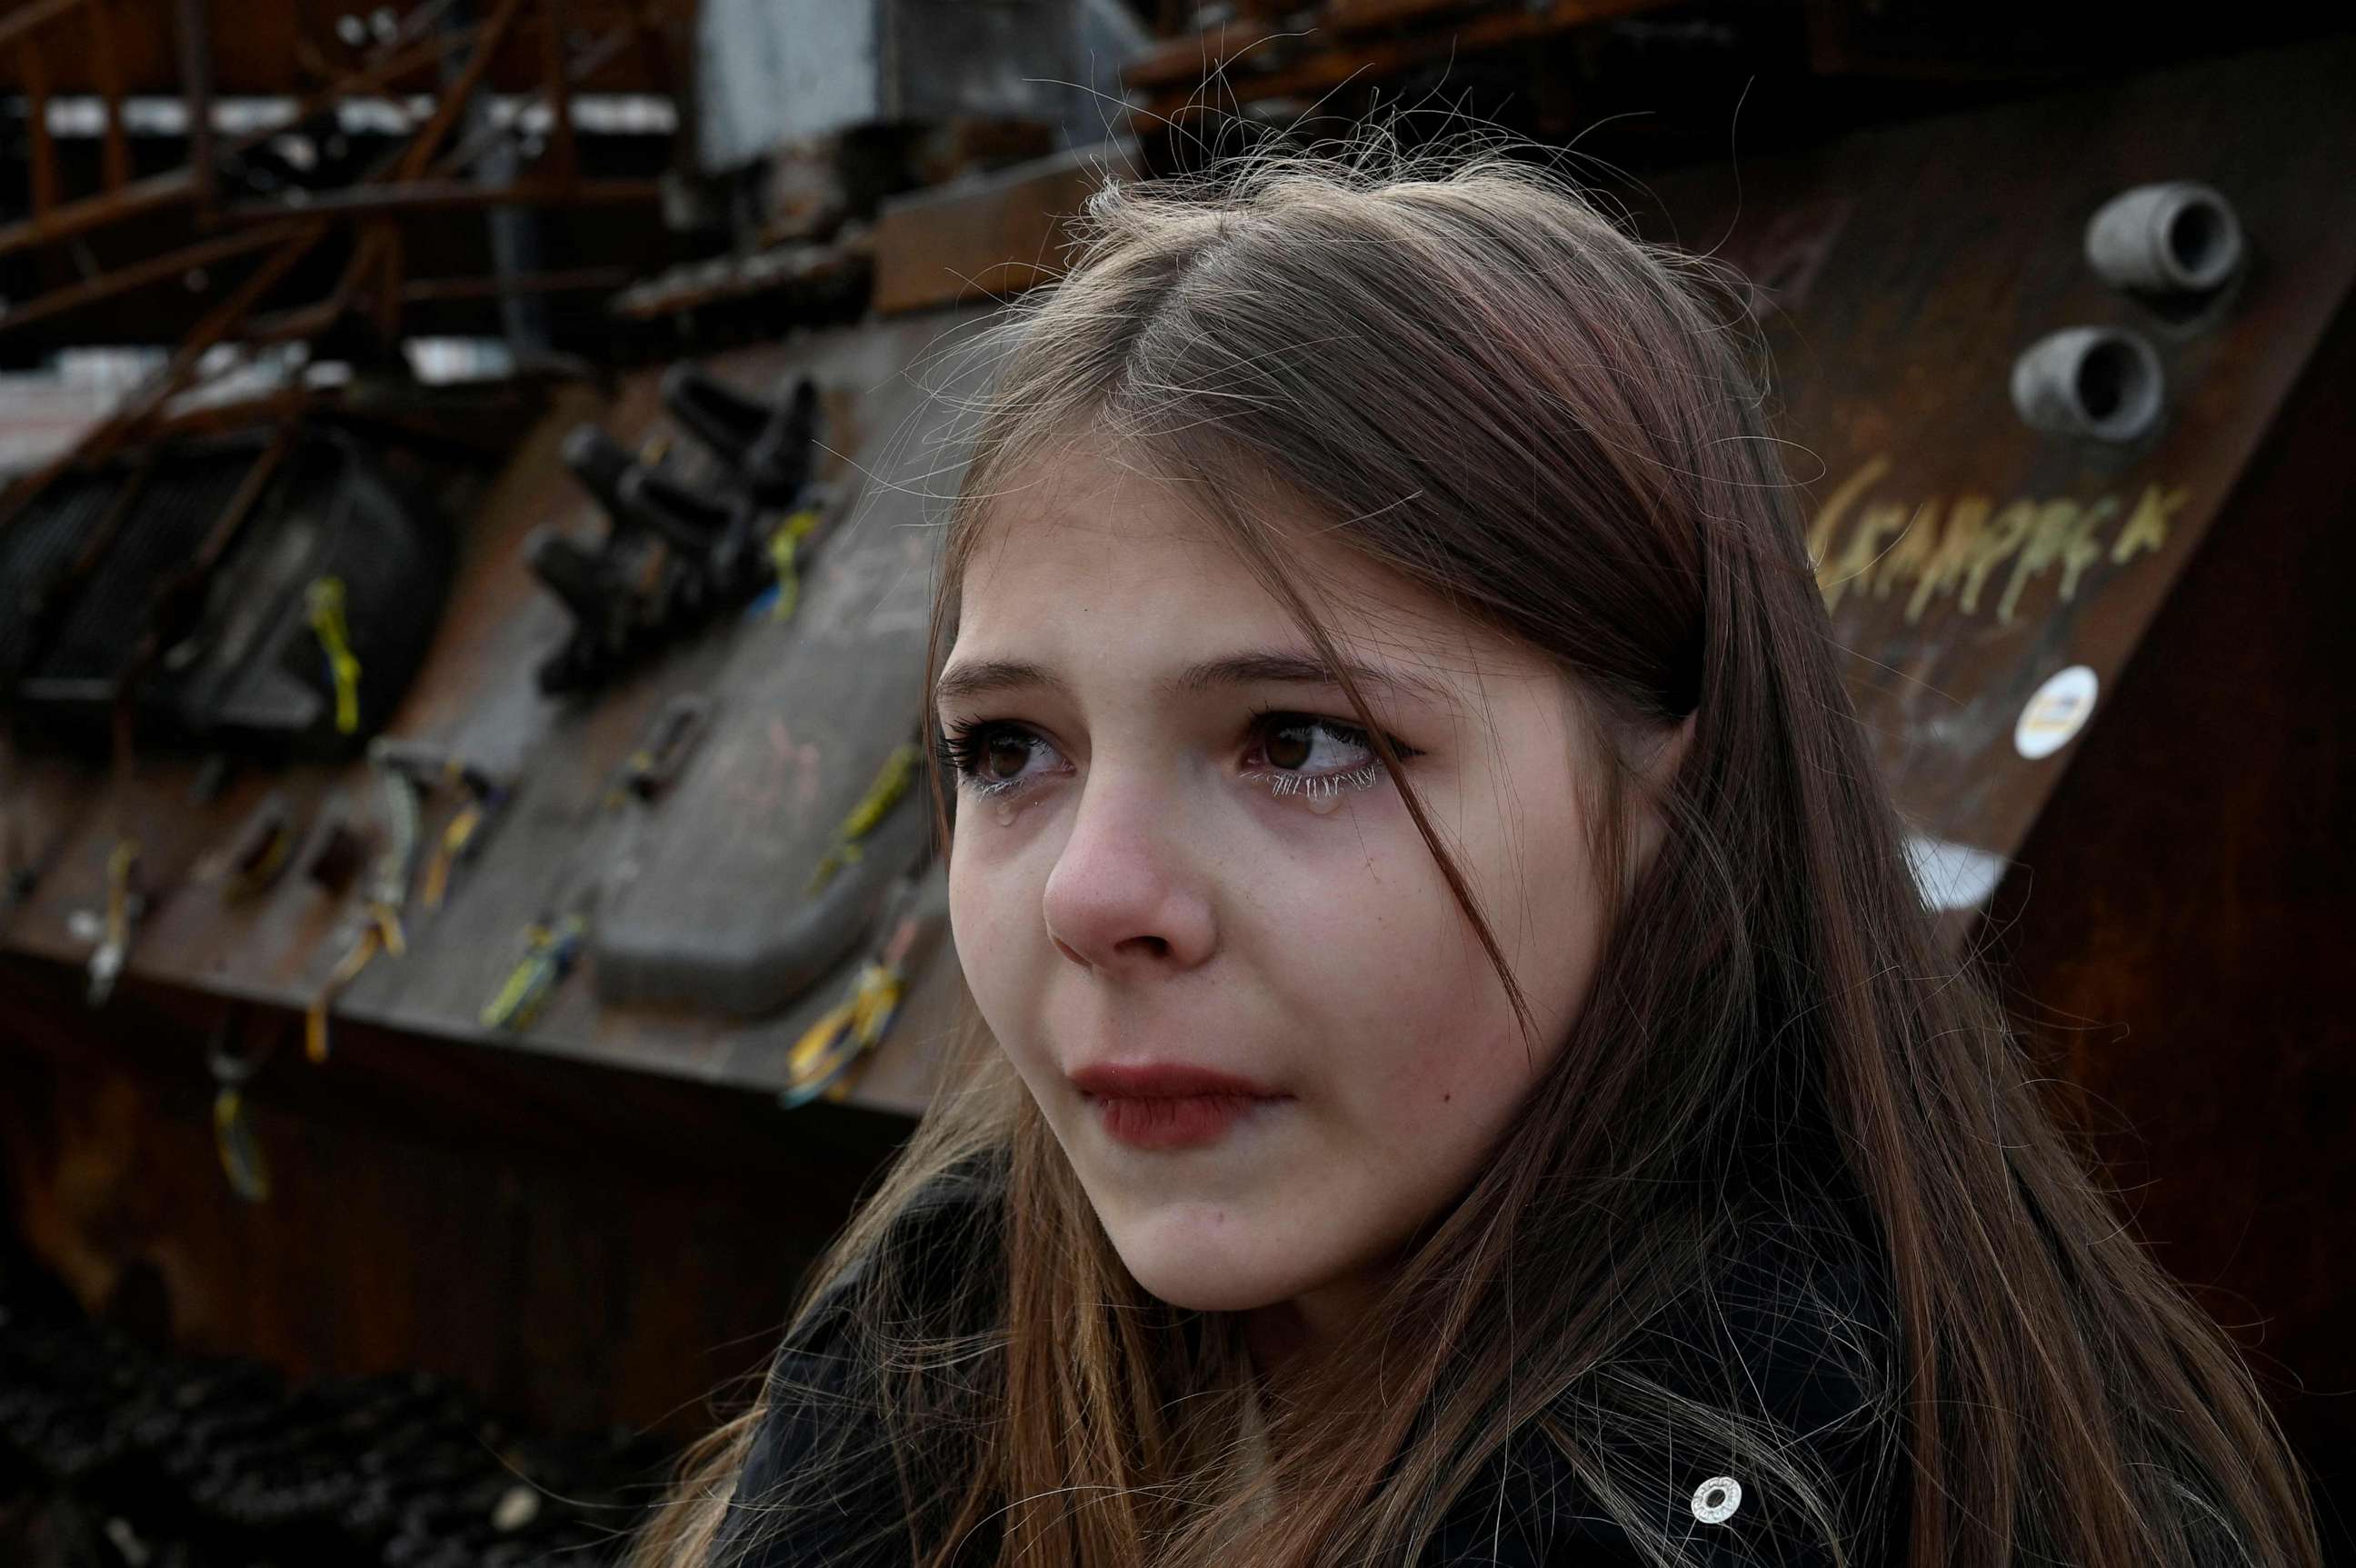 PHOTO: Spivak Nastya, a 13-year-old Ukrainian refugee from the war-torn Donetsk region, reacts as she talks with journalists next to a tank at an open air exhibition of destroyed Russian armored equipment in the center of Kyiv, Ukraine, on May 9, 2023.